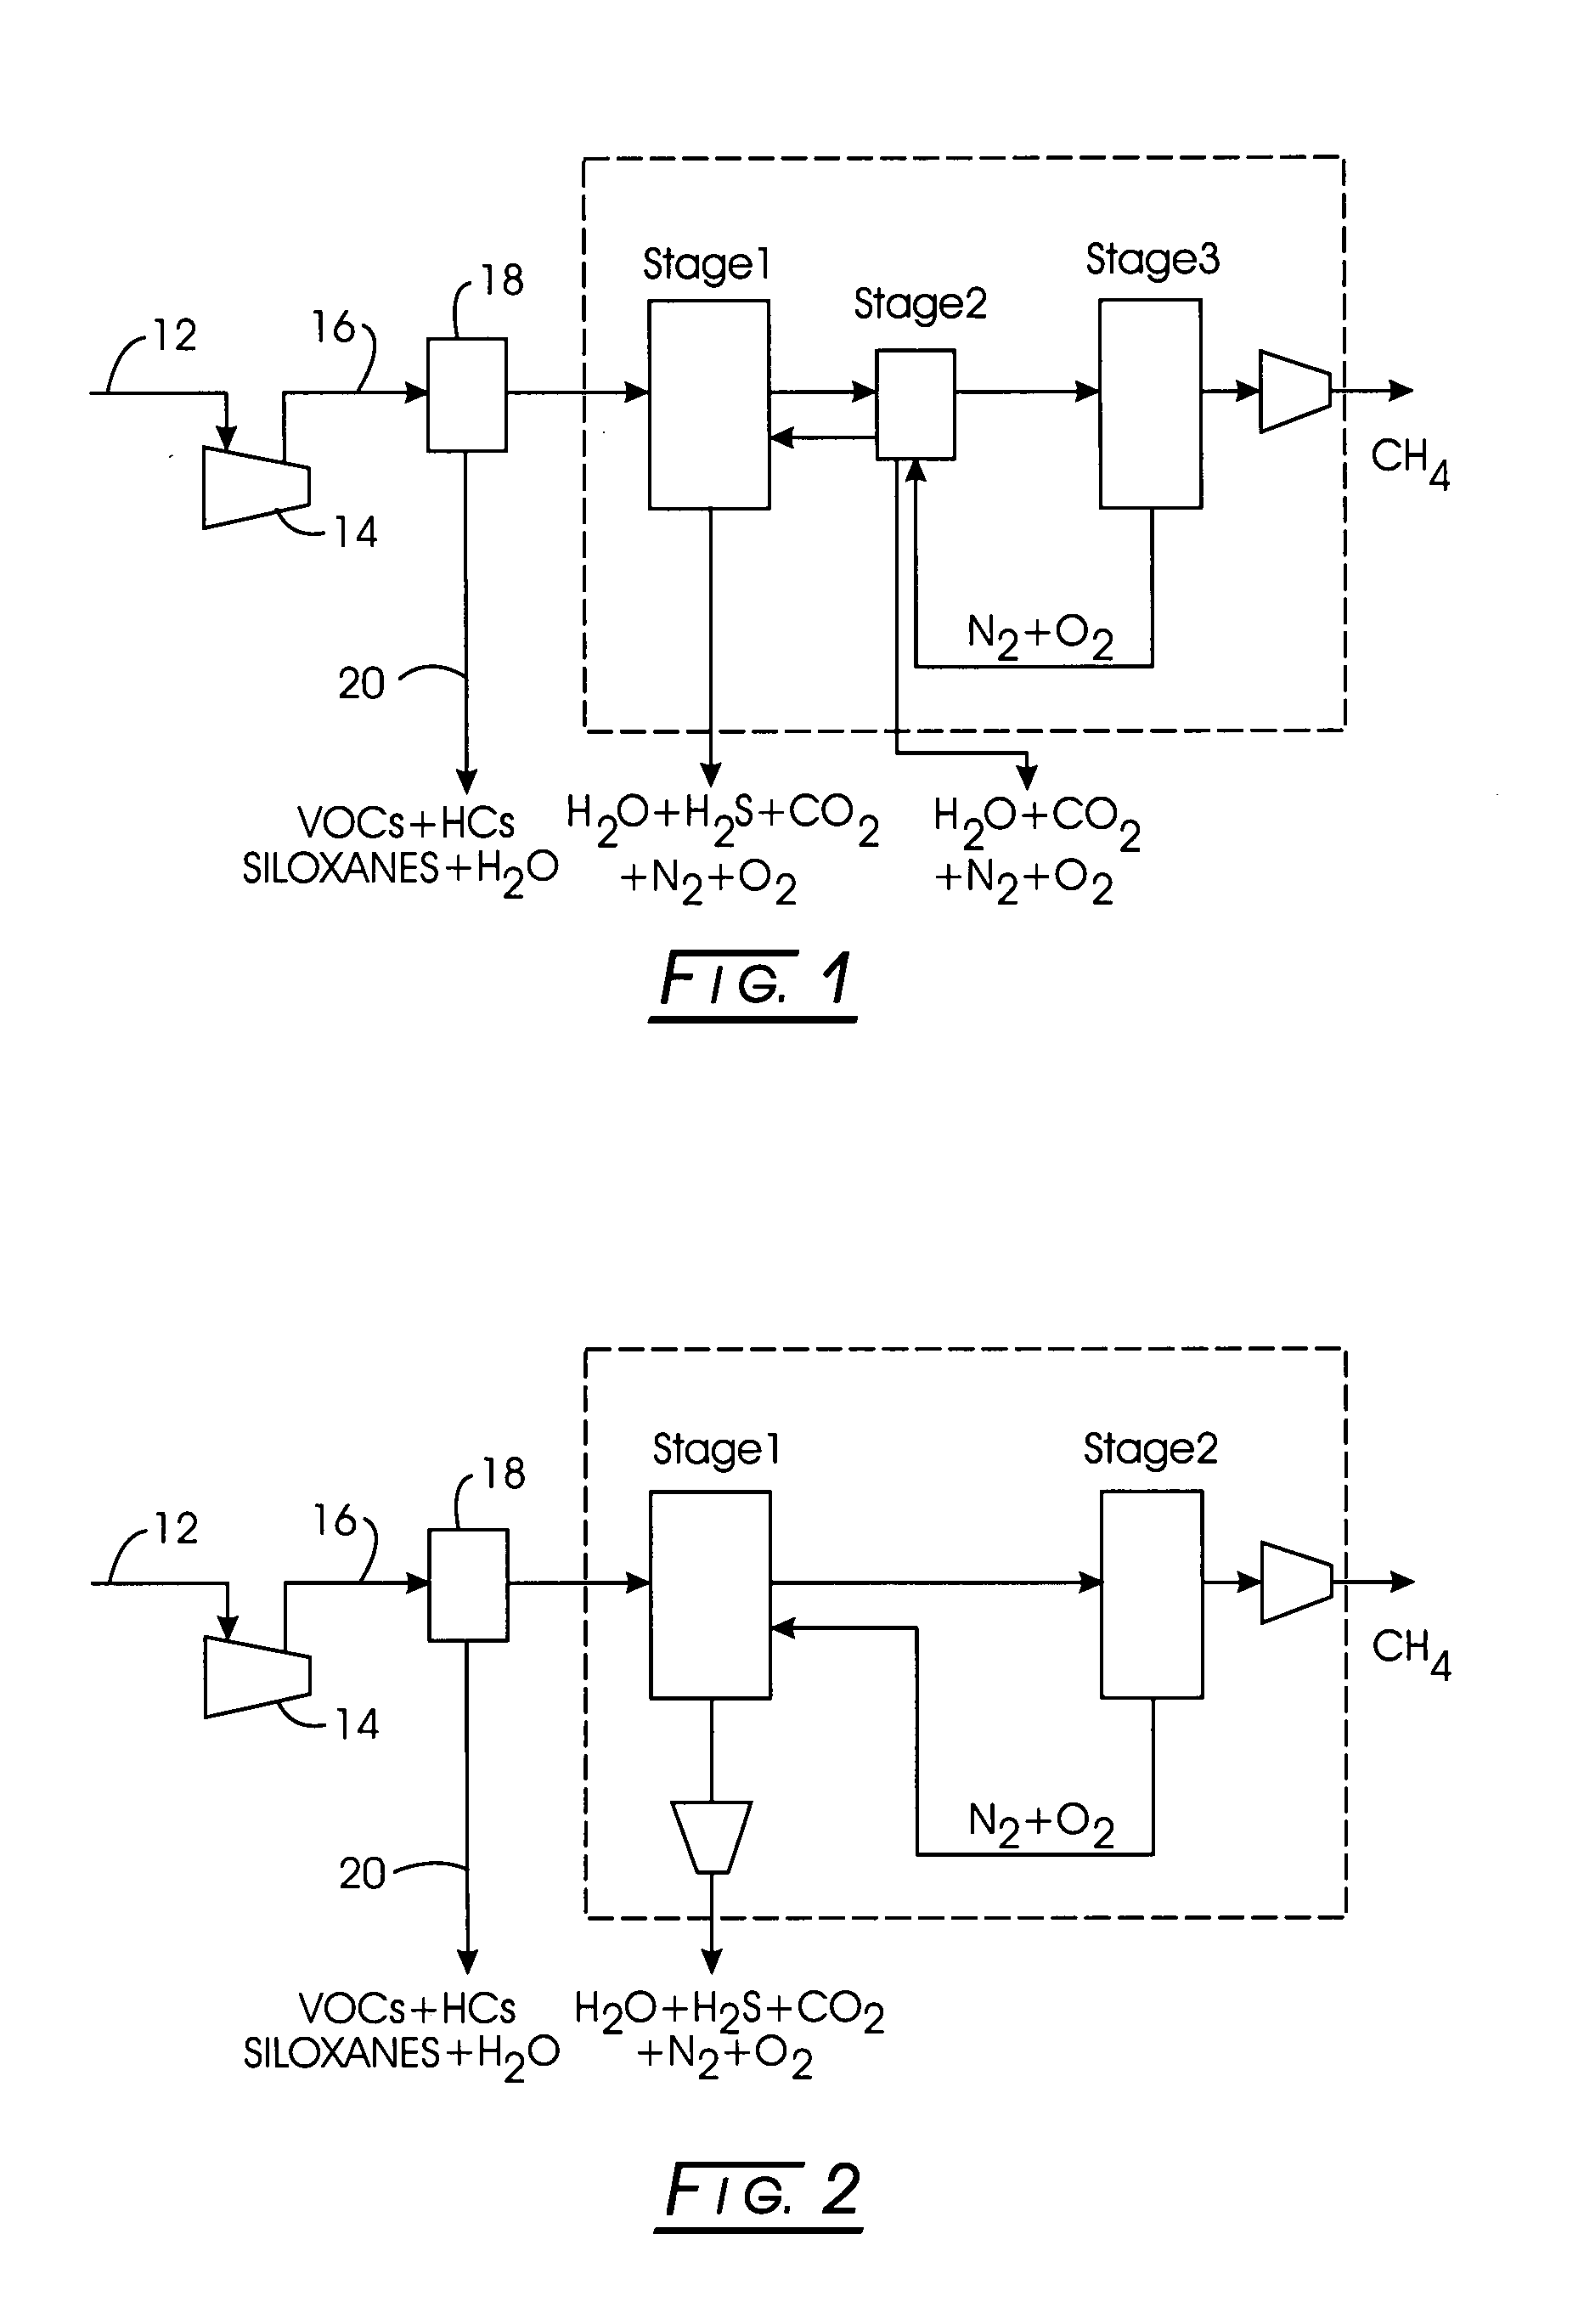 Multi-stage adsorption system for gas mixture sparation